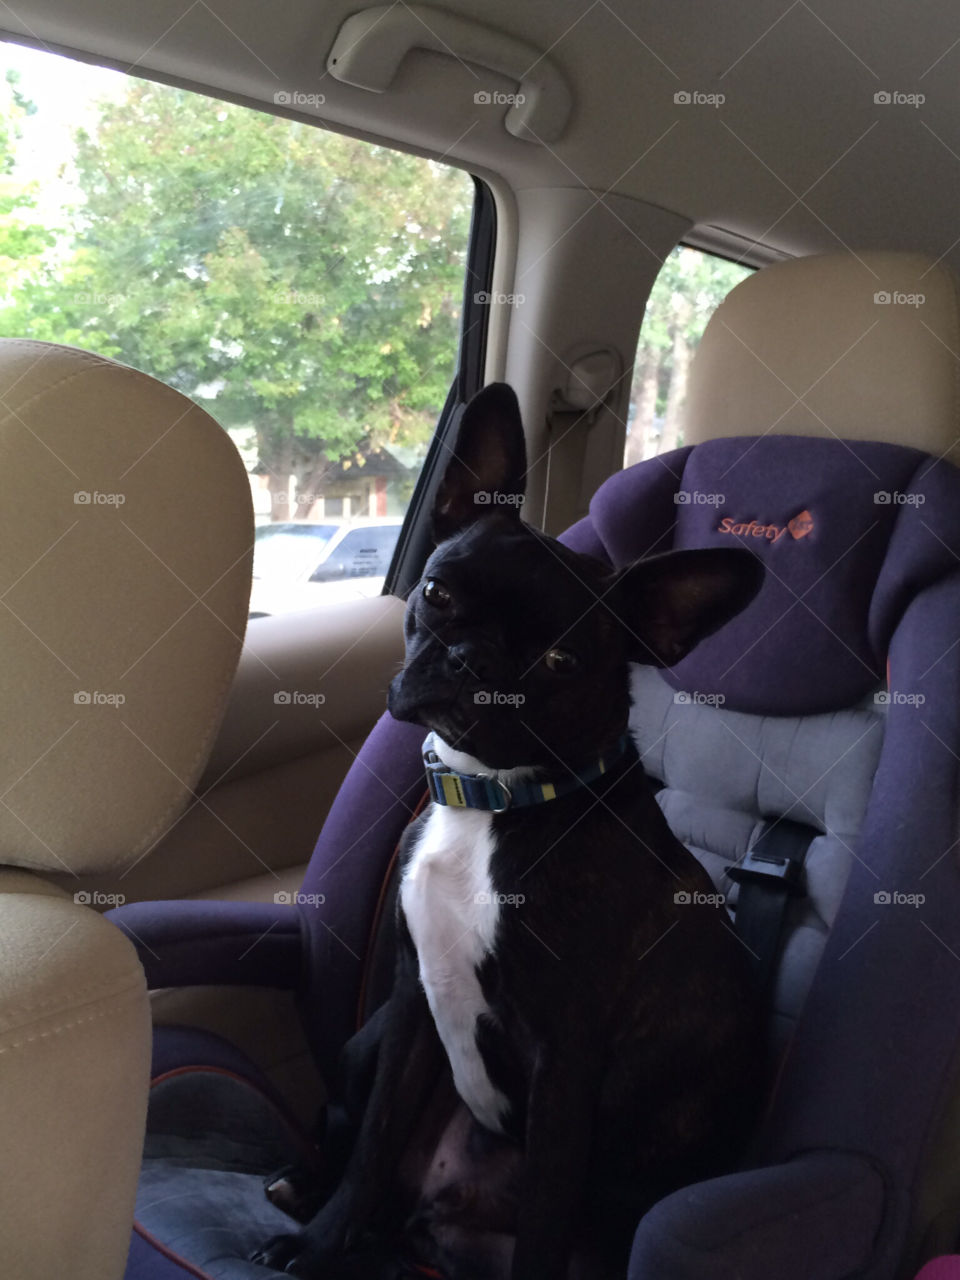 Patiently. Waiting for his bestie! He always rides in her booster seat if she's not with us.